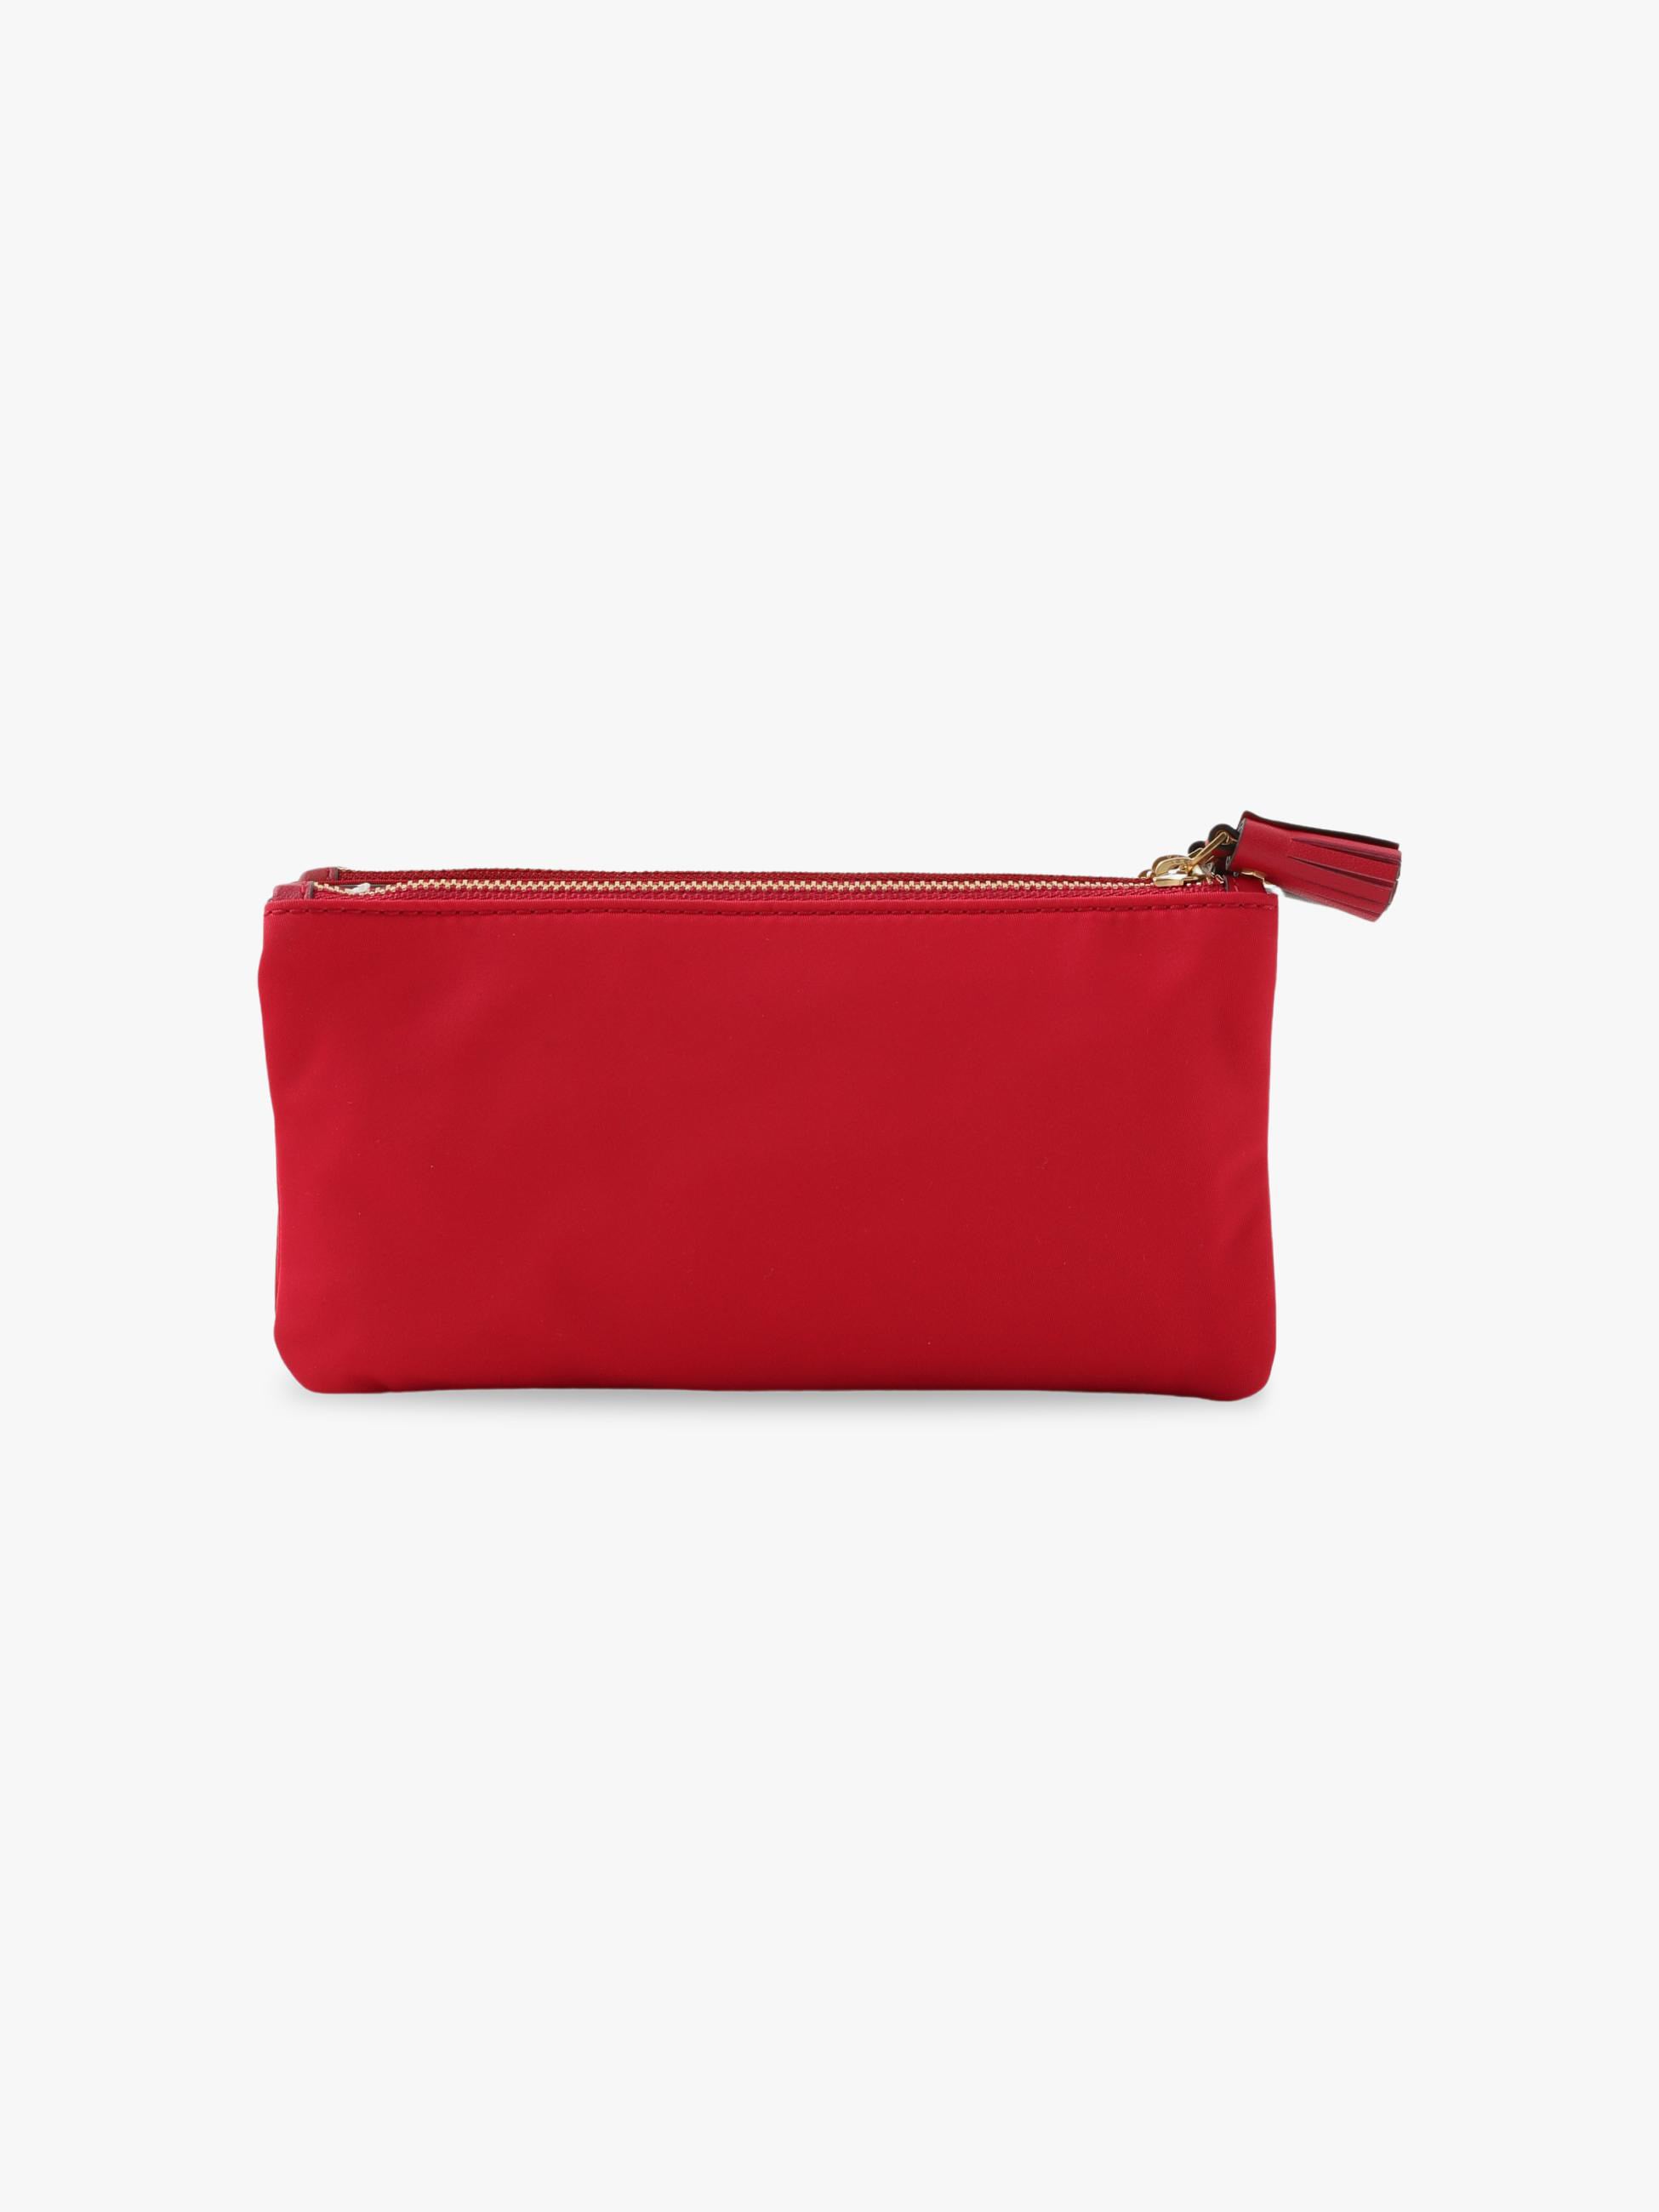 Mini Filing Cabinet Make Up Pouch 詳細画像 red 1